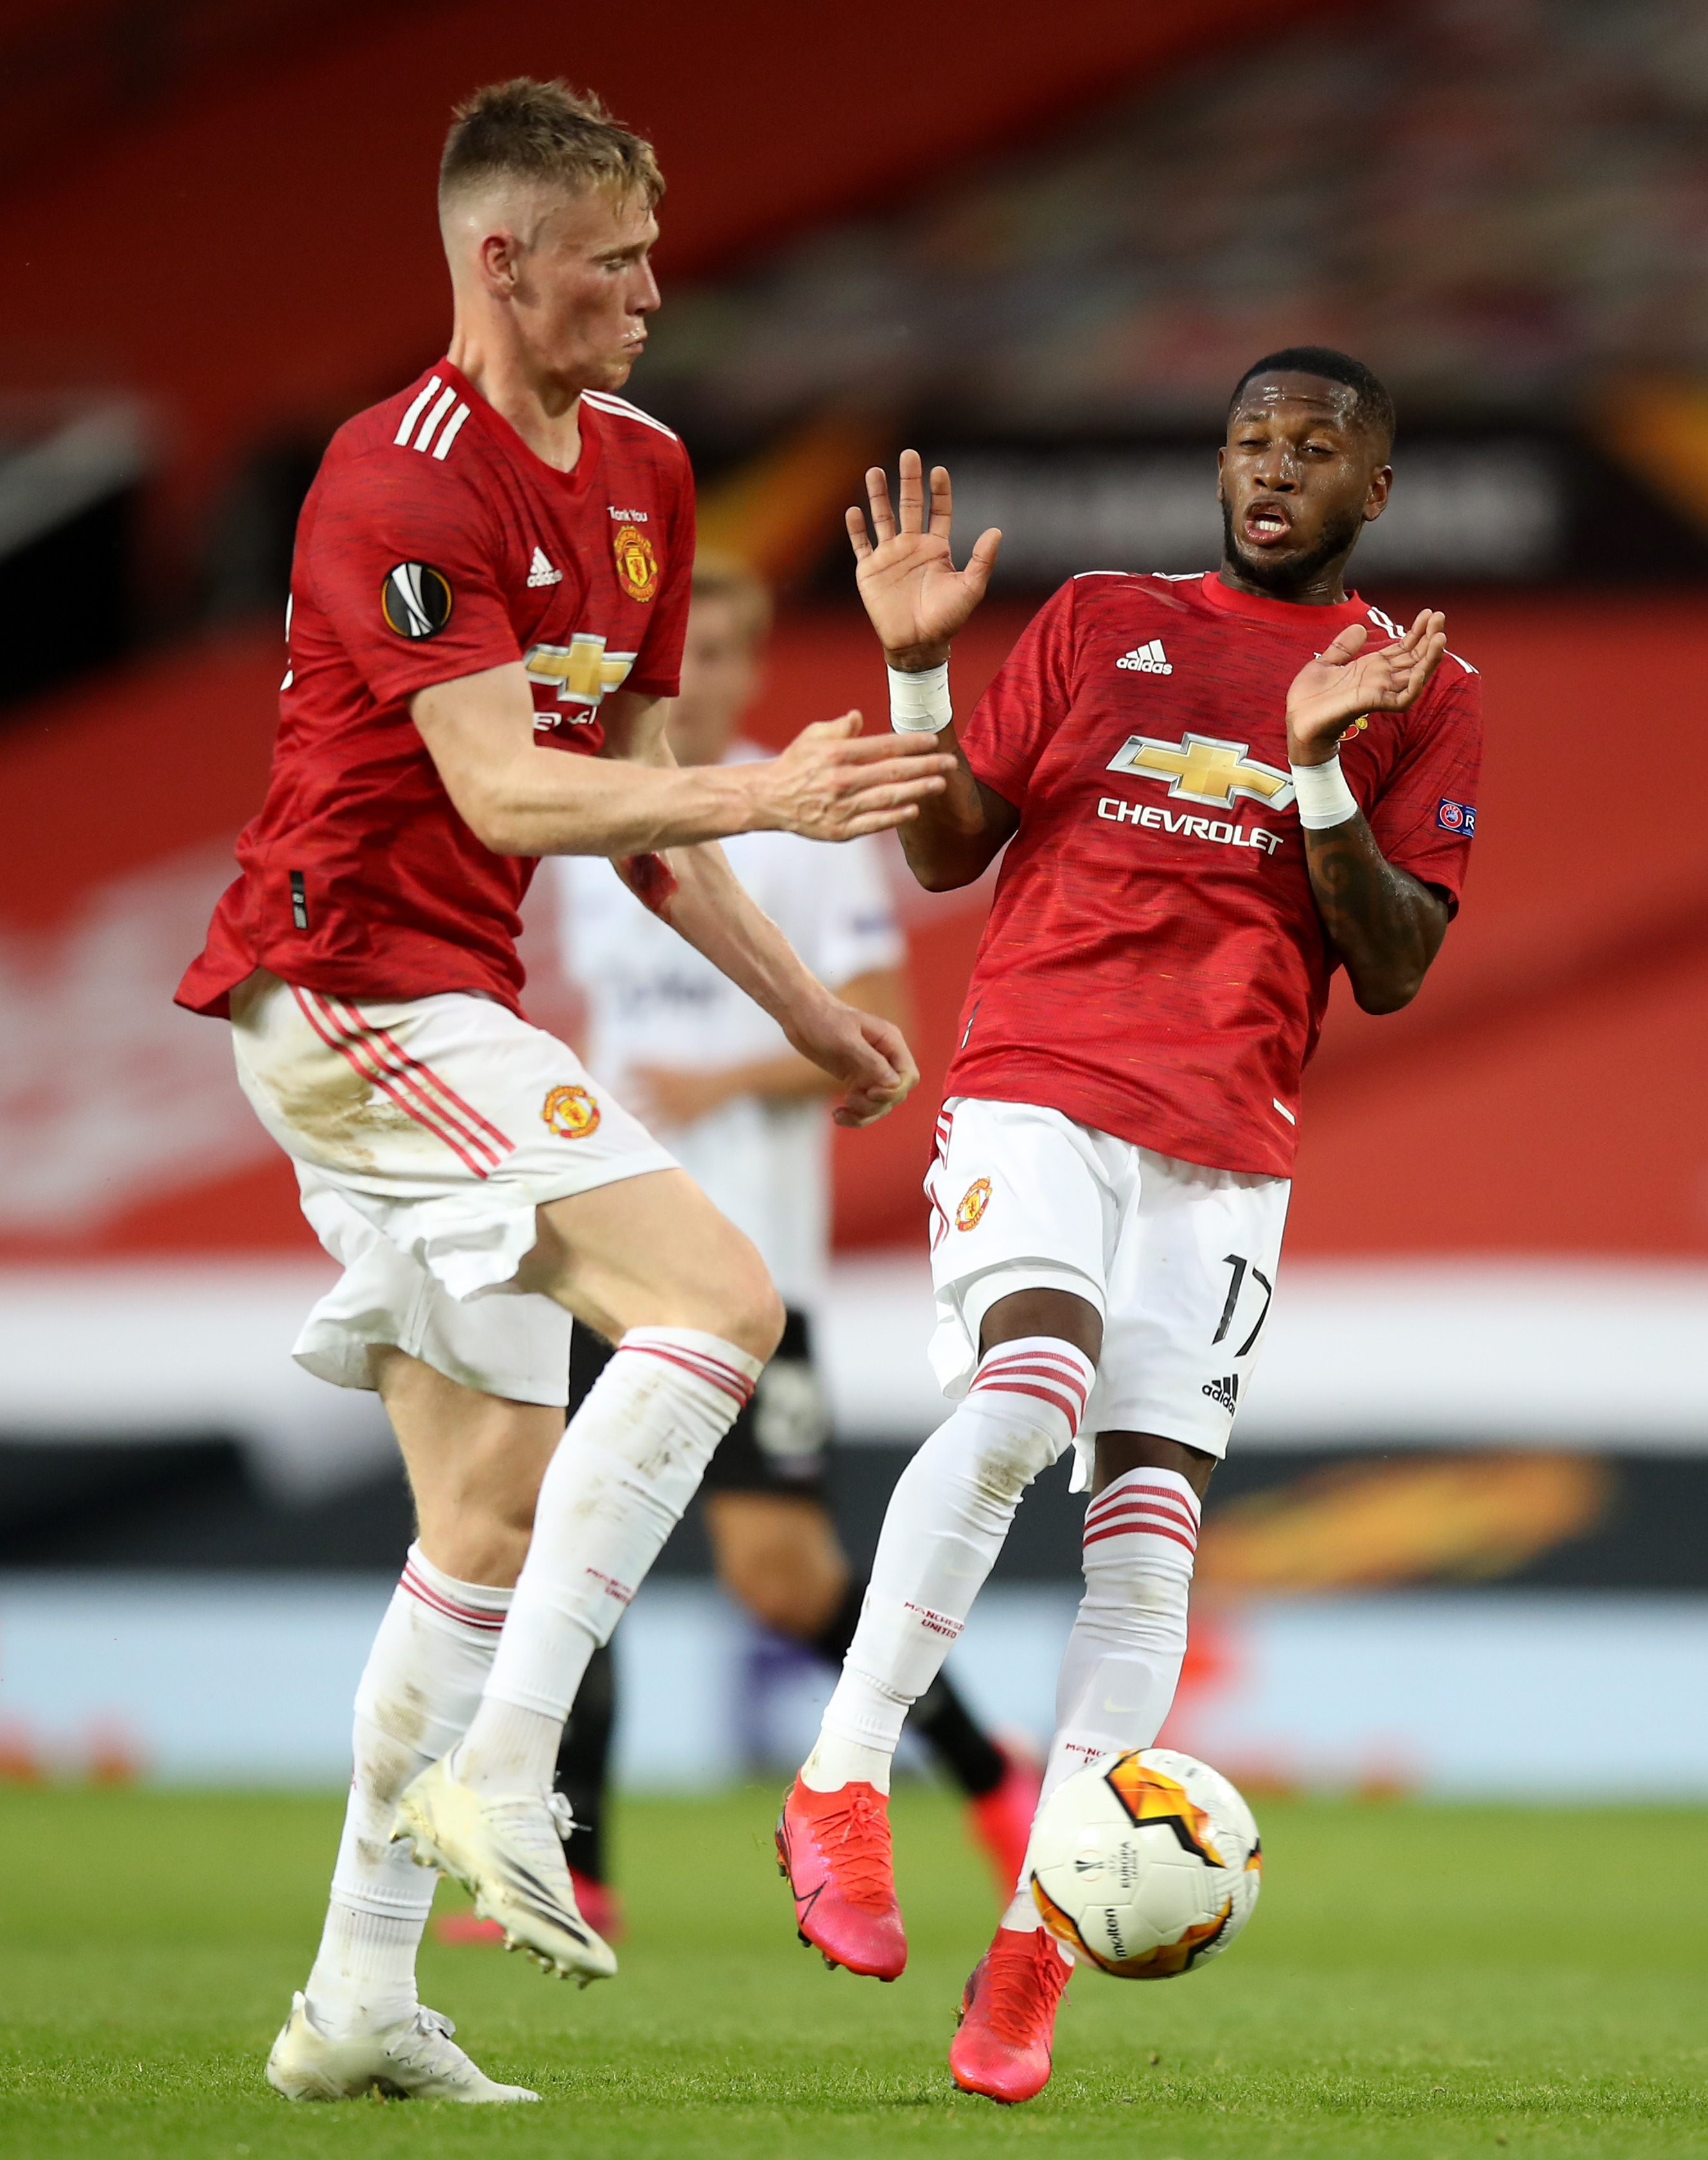 Manchester United v LASK - UEFA Europa League - Round of 16 - Second Leg - Old Trafford